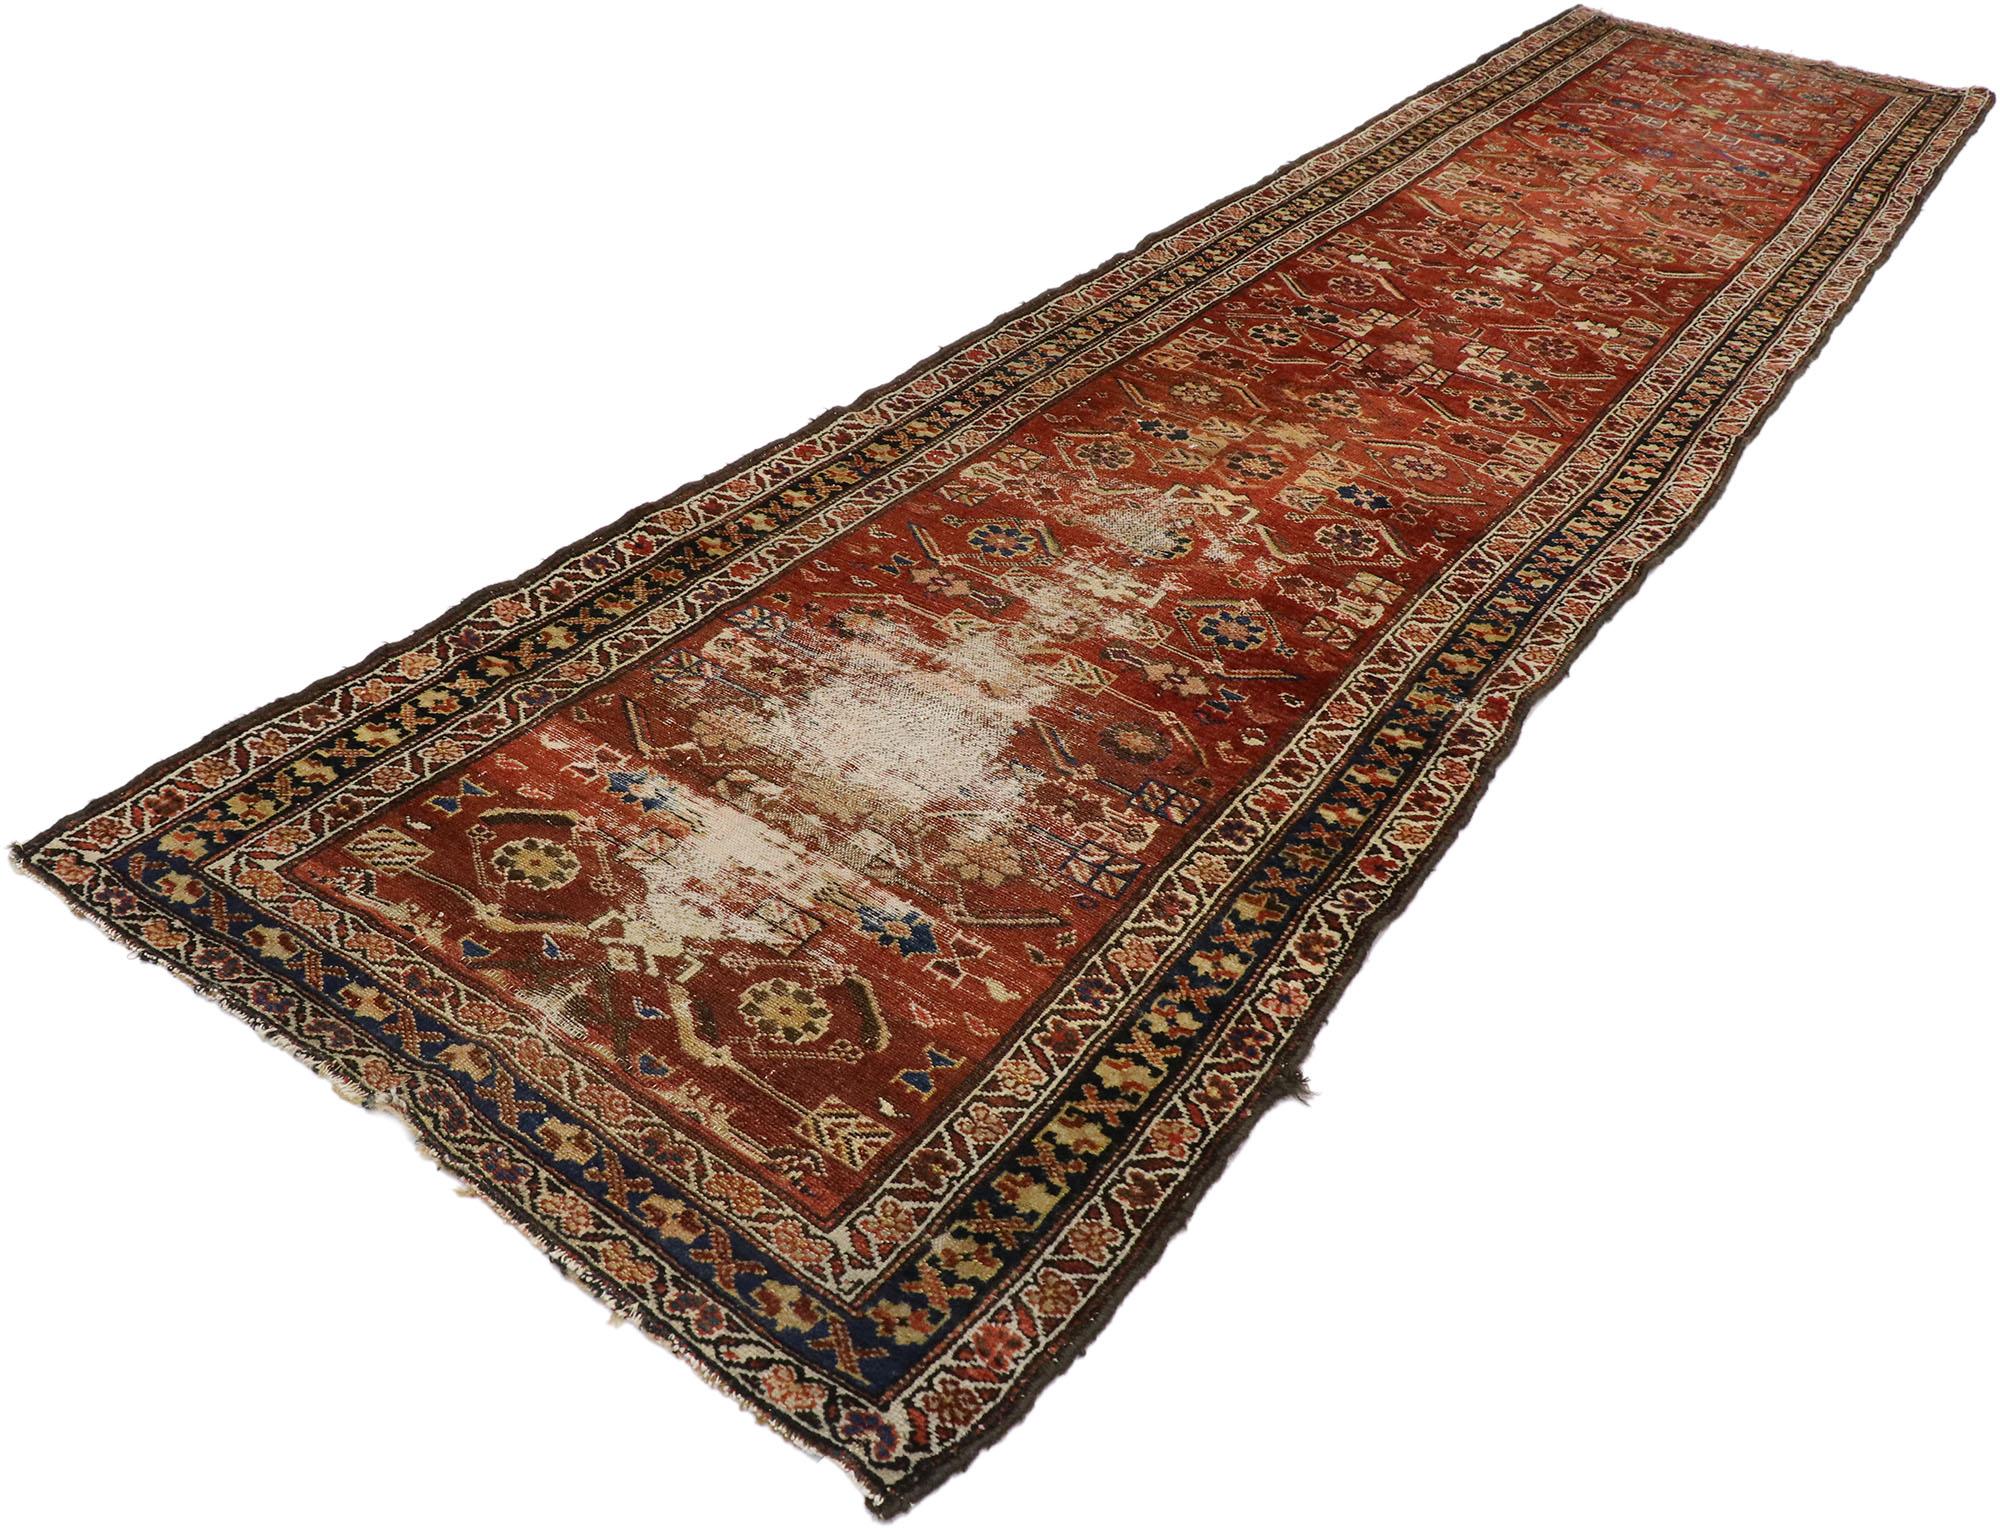 ?77555 distressed antique Persian Mahal runner with rustic Artisan style. ??Decadent beauty combined with understated elegance, this hand-knotted wool distressed Persian Mahal runner is the answer to elevated traditional furnishings with rustic